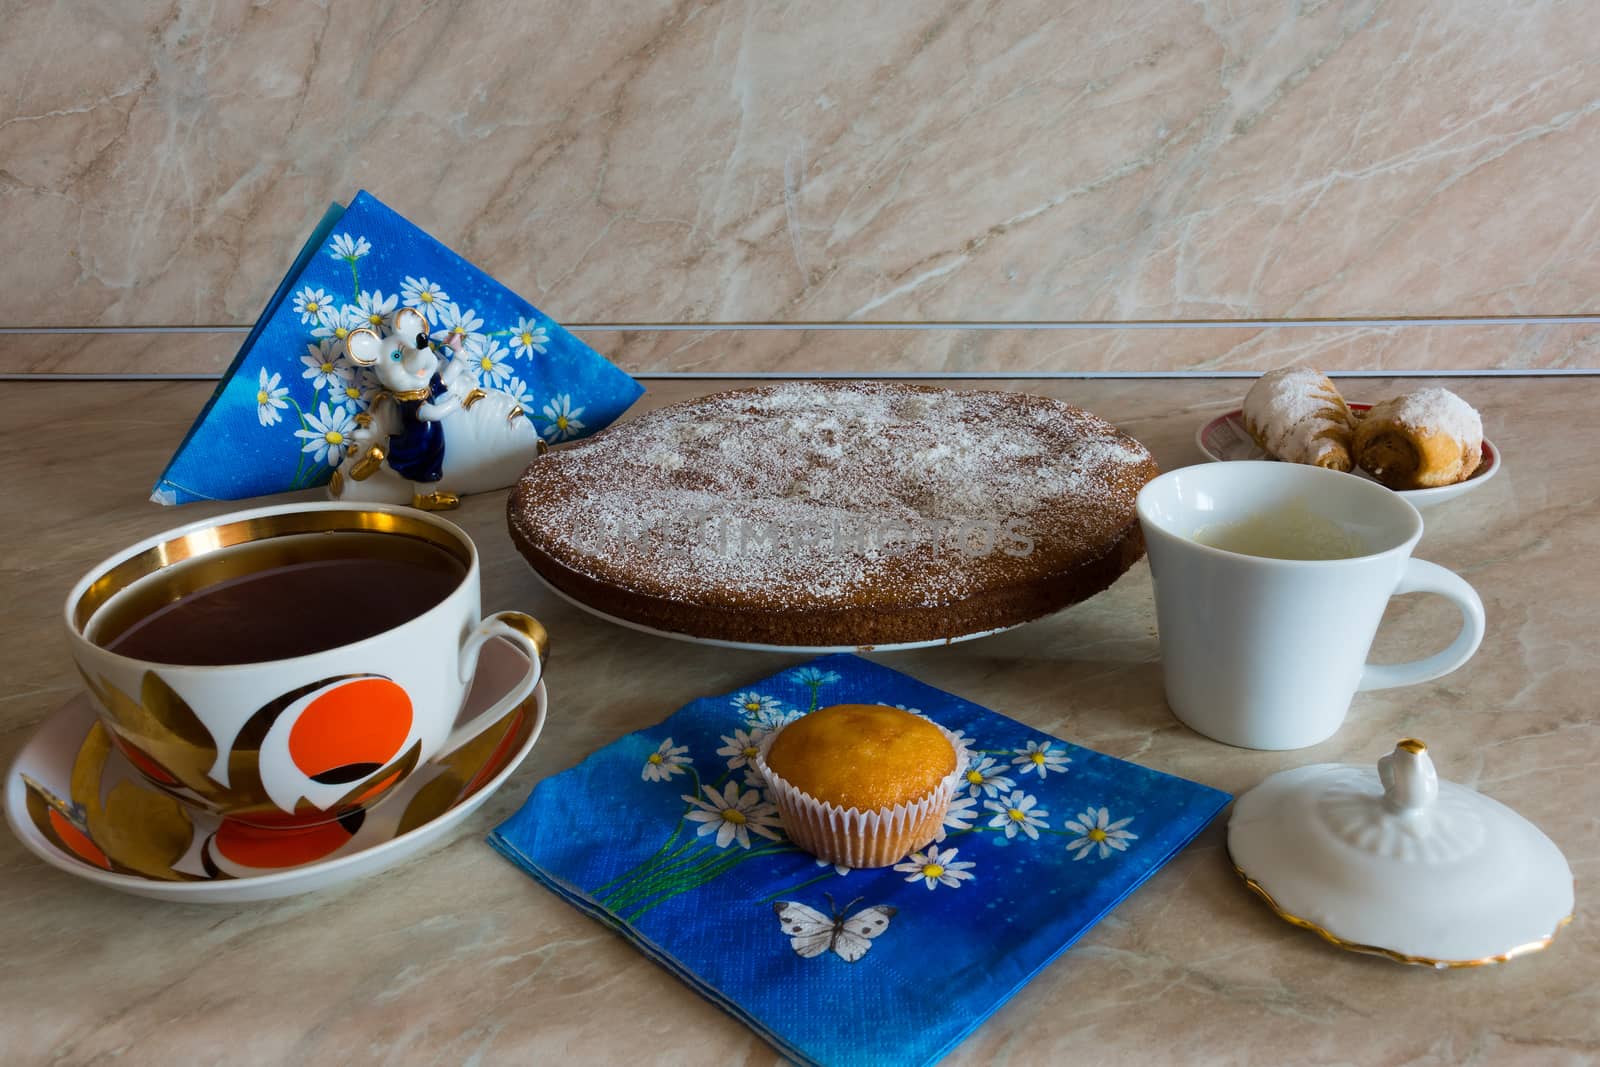 the photograph depicts a tea cake